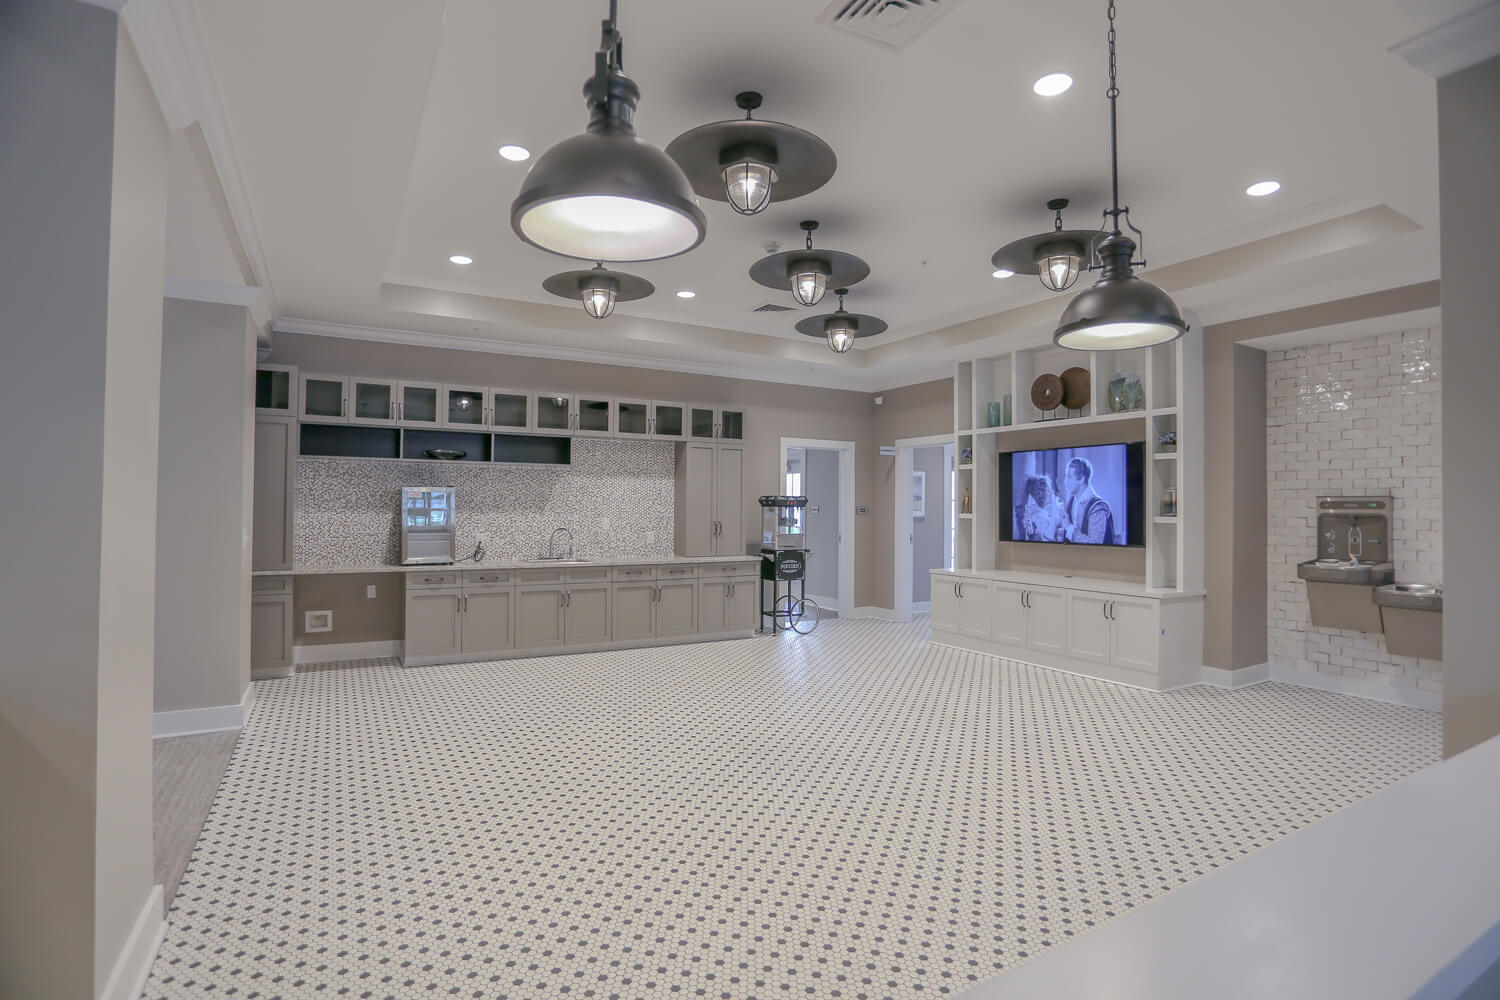 Grand South Senior Living - Coffee Shop - Designed by Foshee Architecture